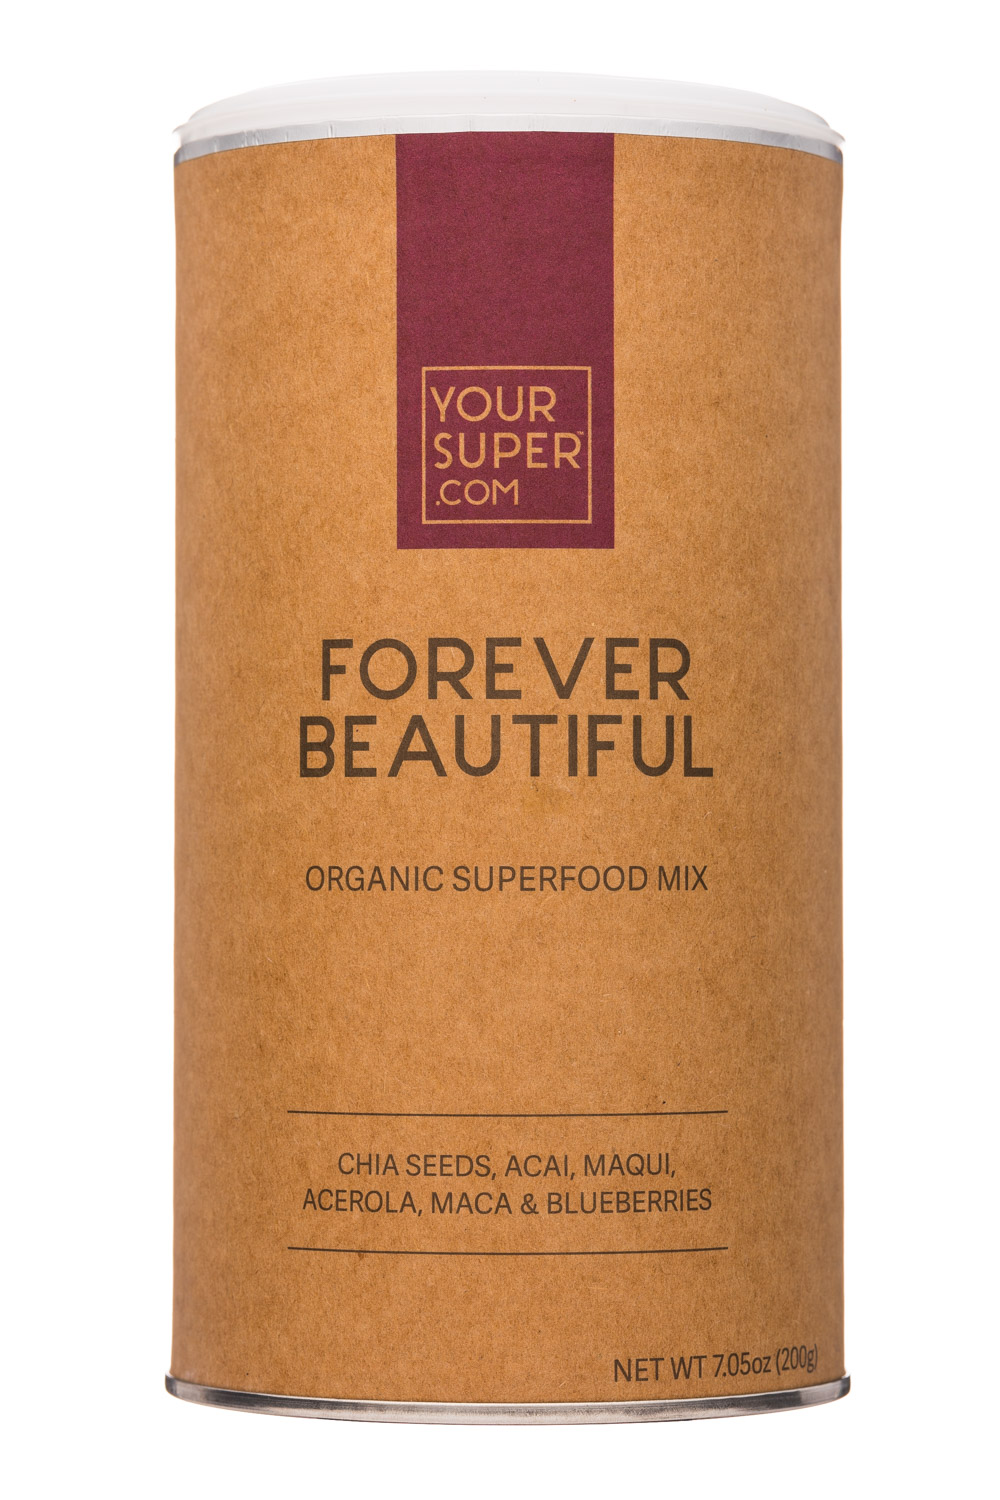 Your Super (@yoursuperfoods) • Instagram photos and videos